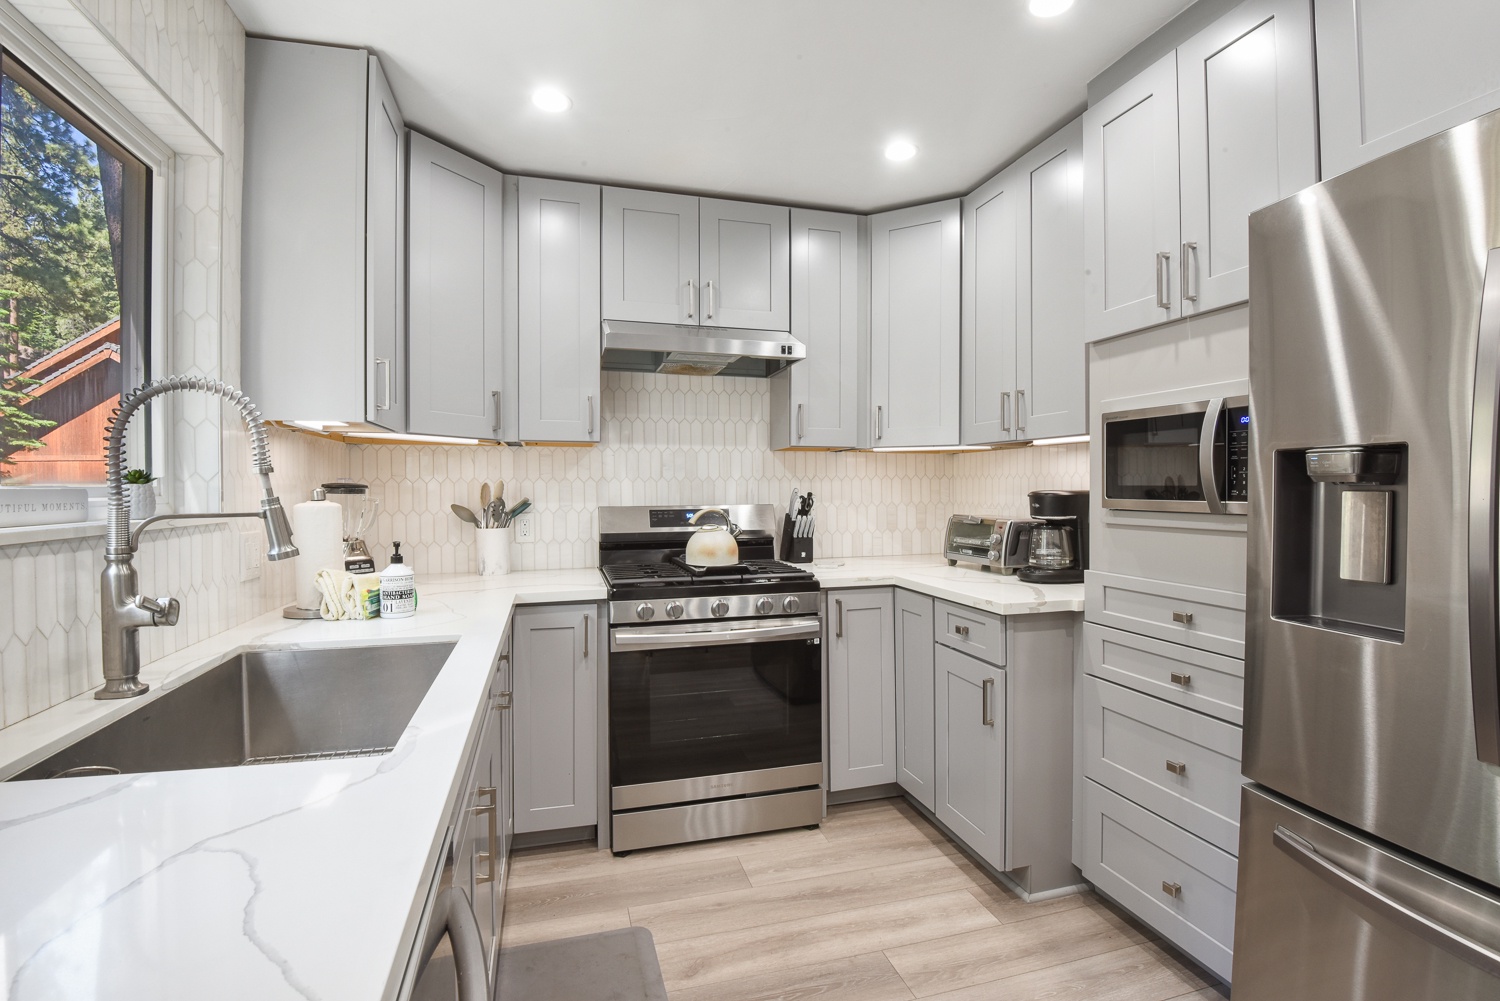 Fantastic amenities & all the comforts of home await in the polished kitchen